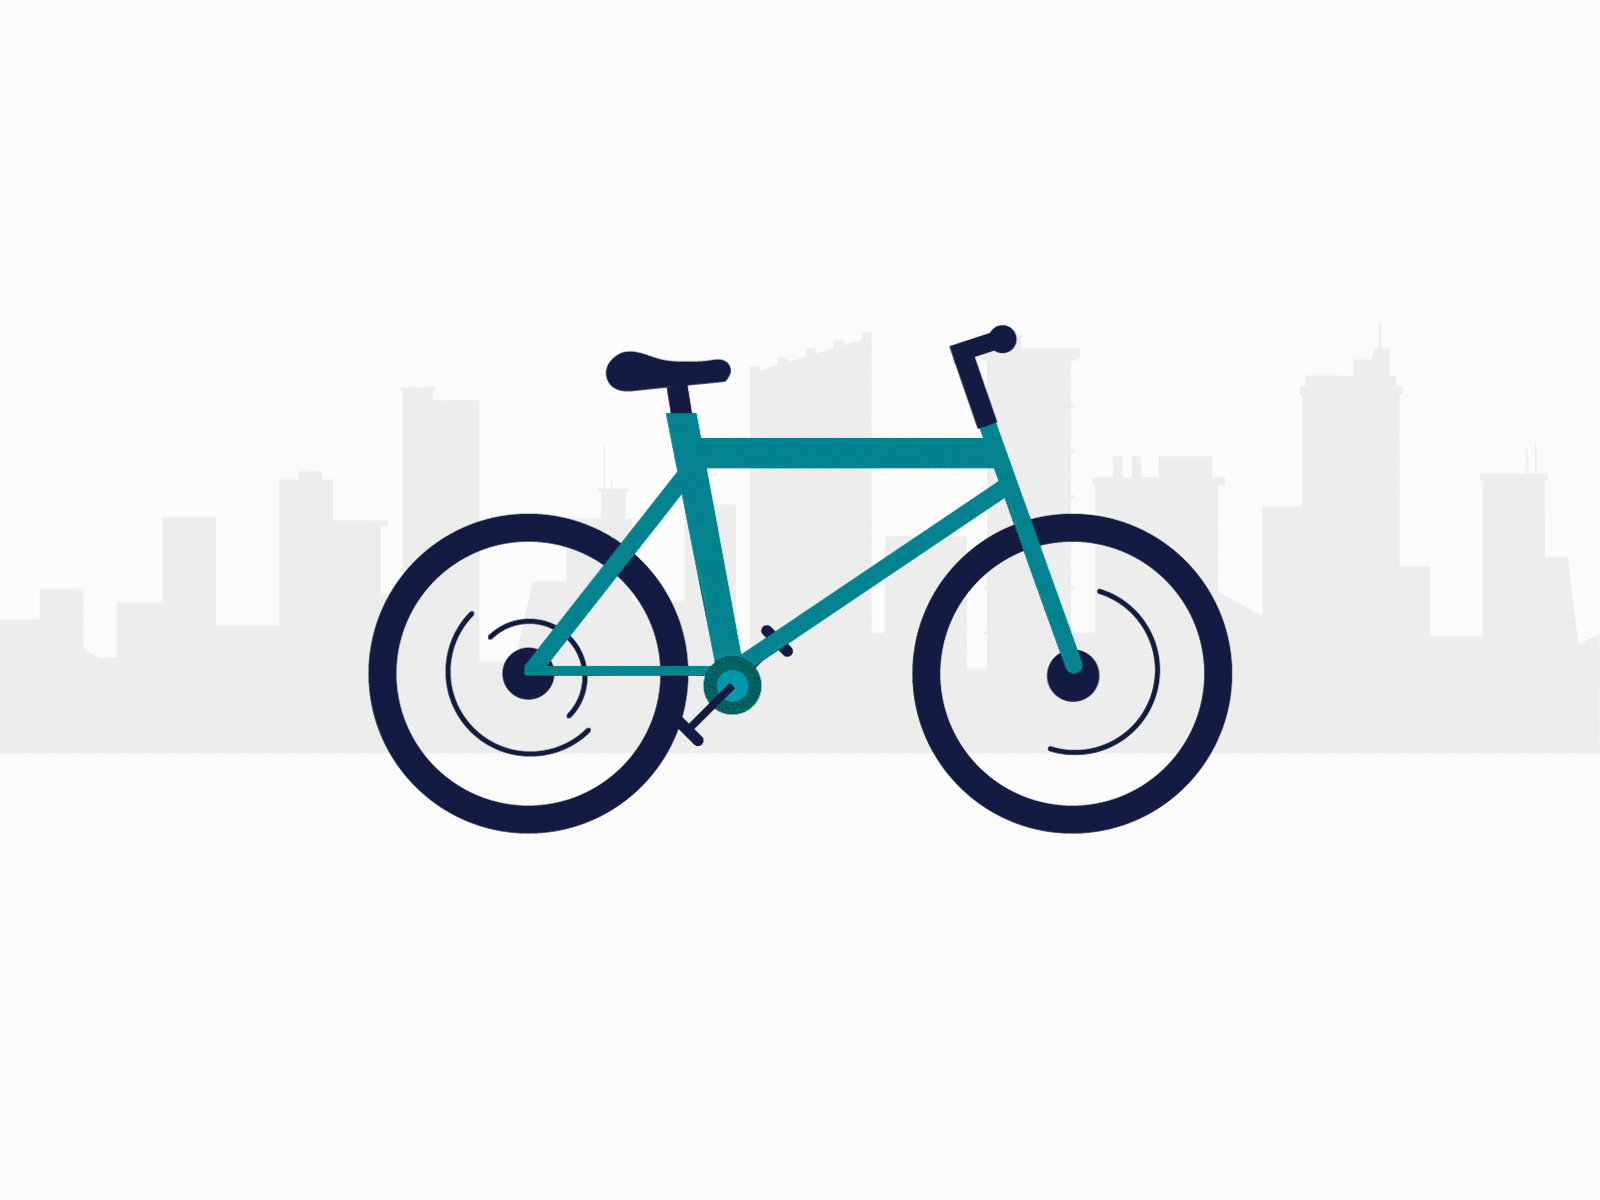 Bicycle Animation by Sathistory on Dribbble